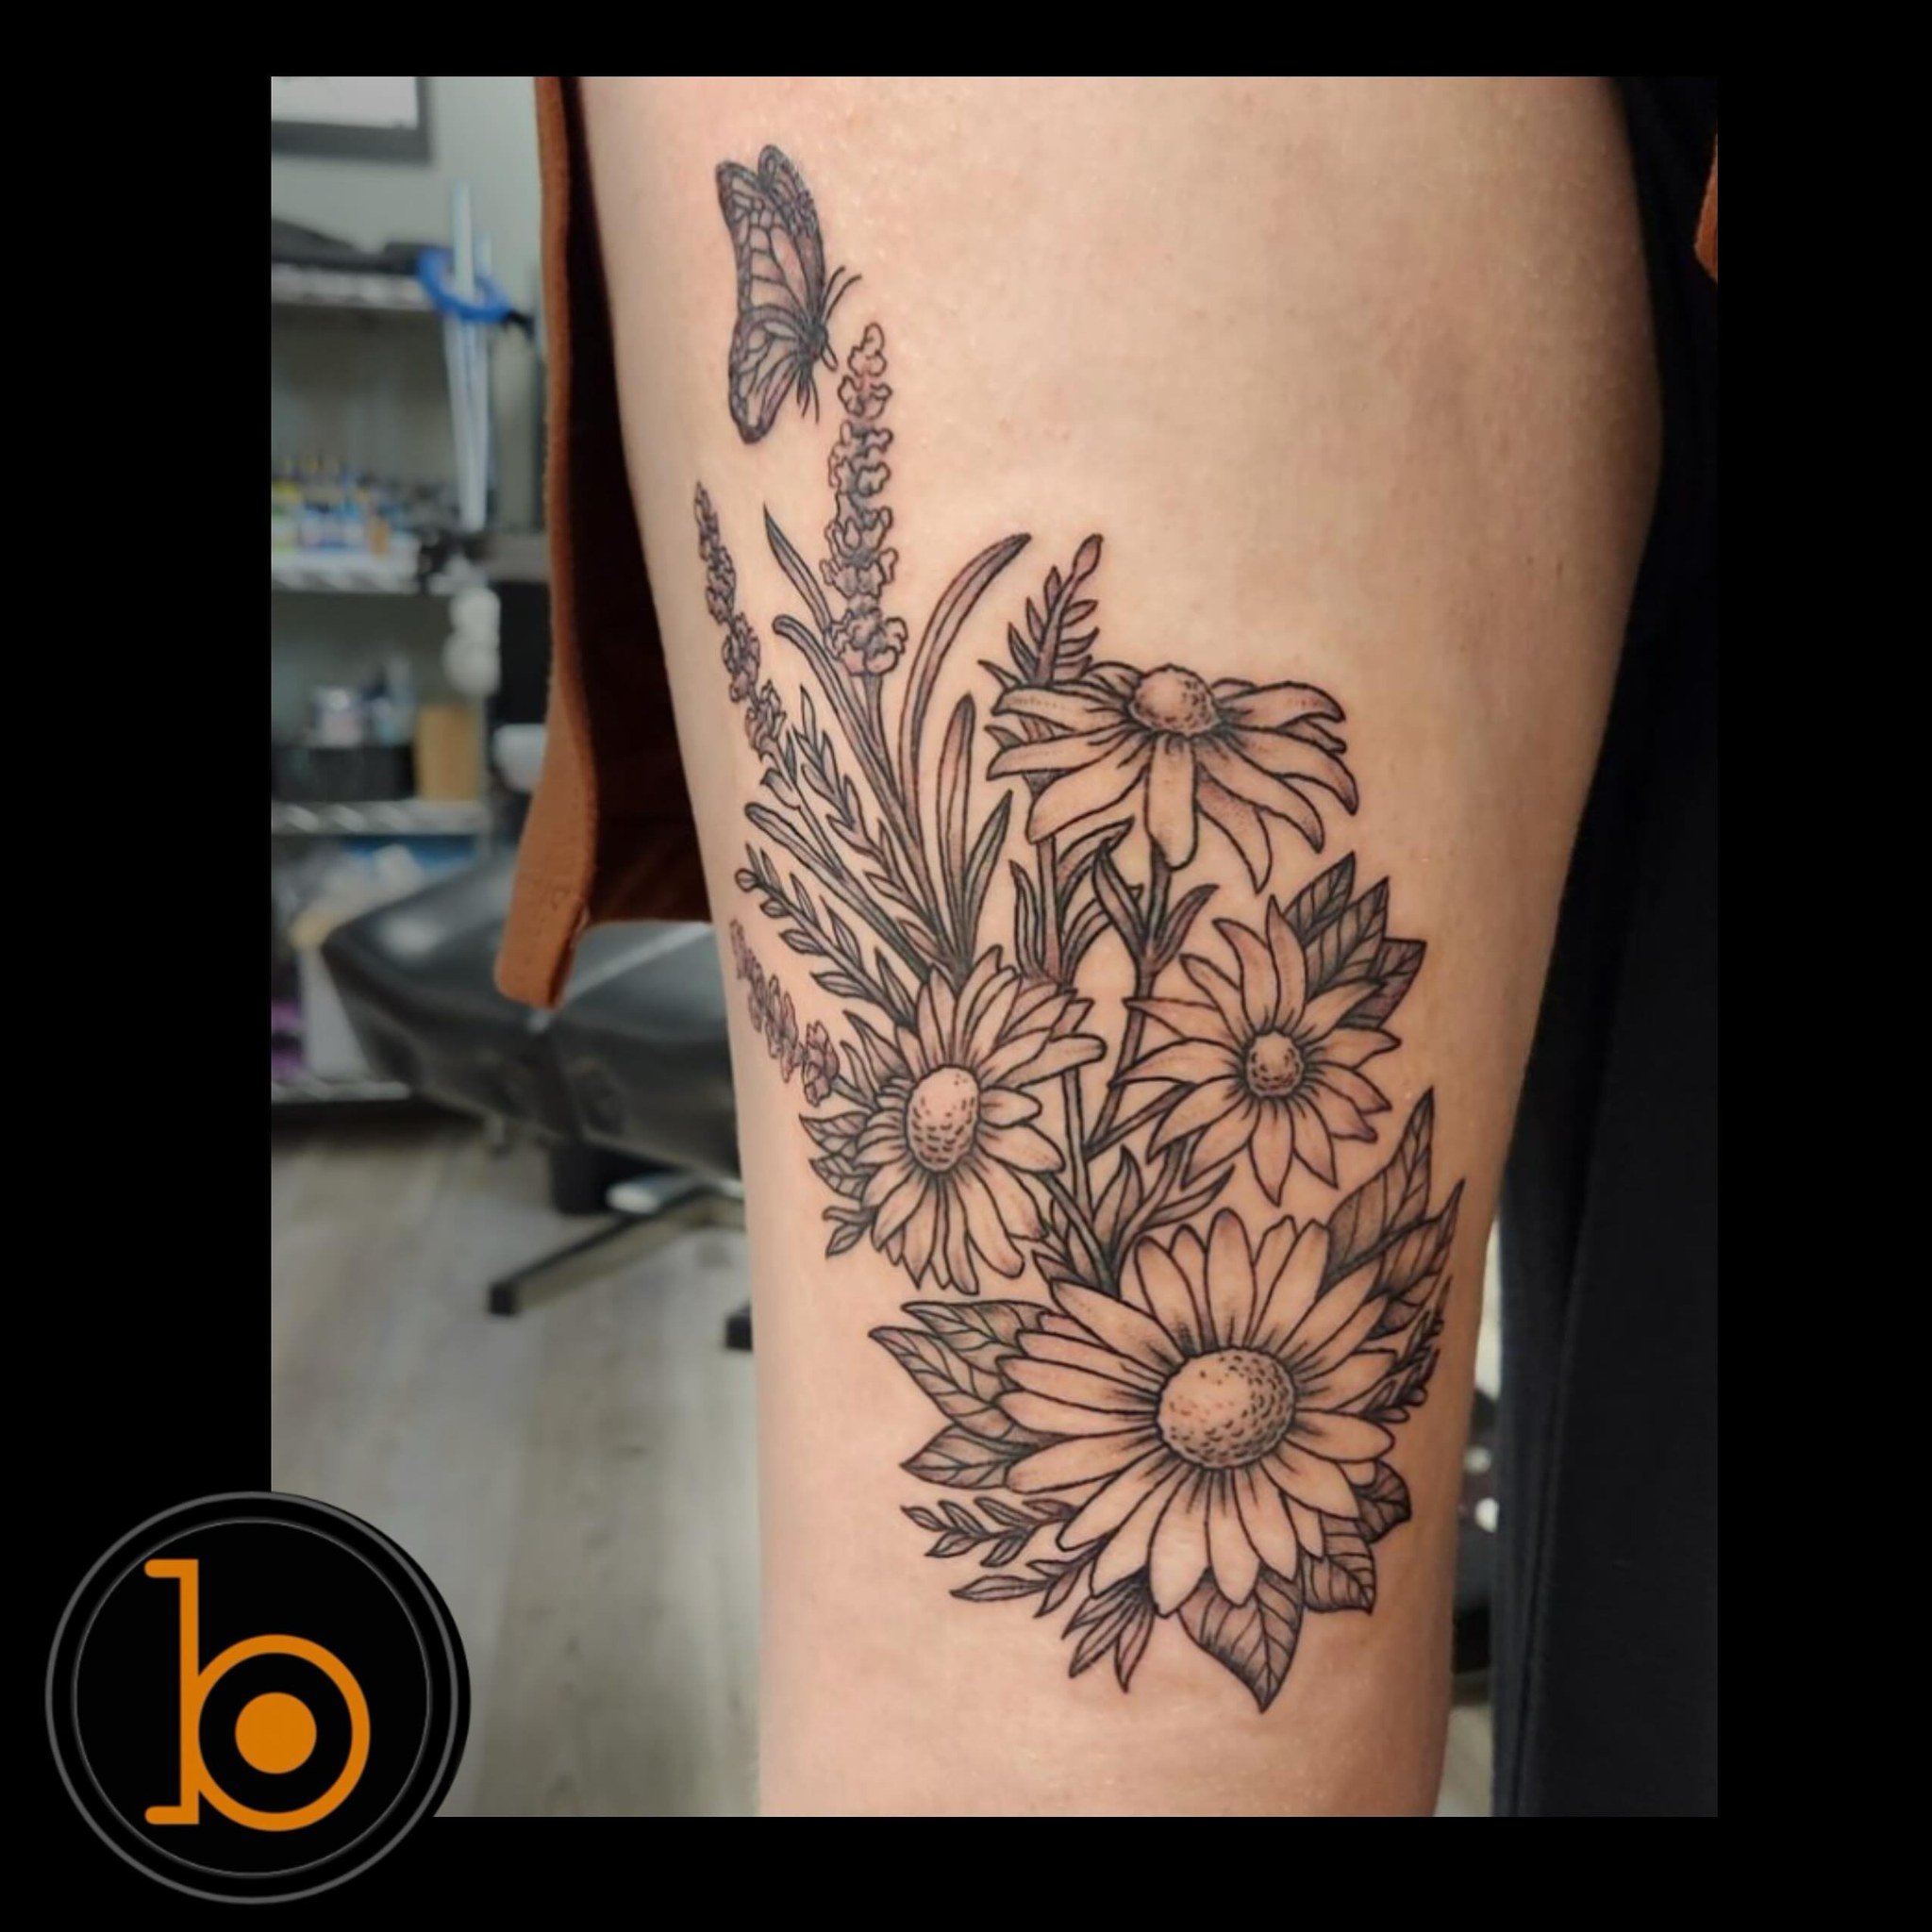 Back at it again with our attempts at manifesting warmer weather with spring tattoos&hellip; IS IT WORKING?! Floral piece by resident artist @steevdraws 💐🦋
➖➖➖➖➖➖➖➖➖➖➖➖➖➖➖➖➖
Blueprint Gallery
138 Russell St
 Hadley MA 01035
📱(413)-387-0221 
WALK-I